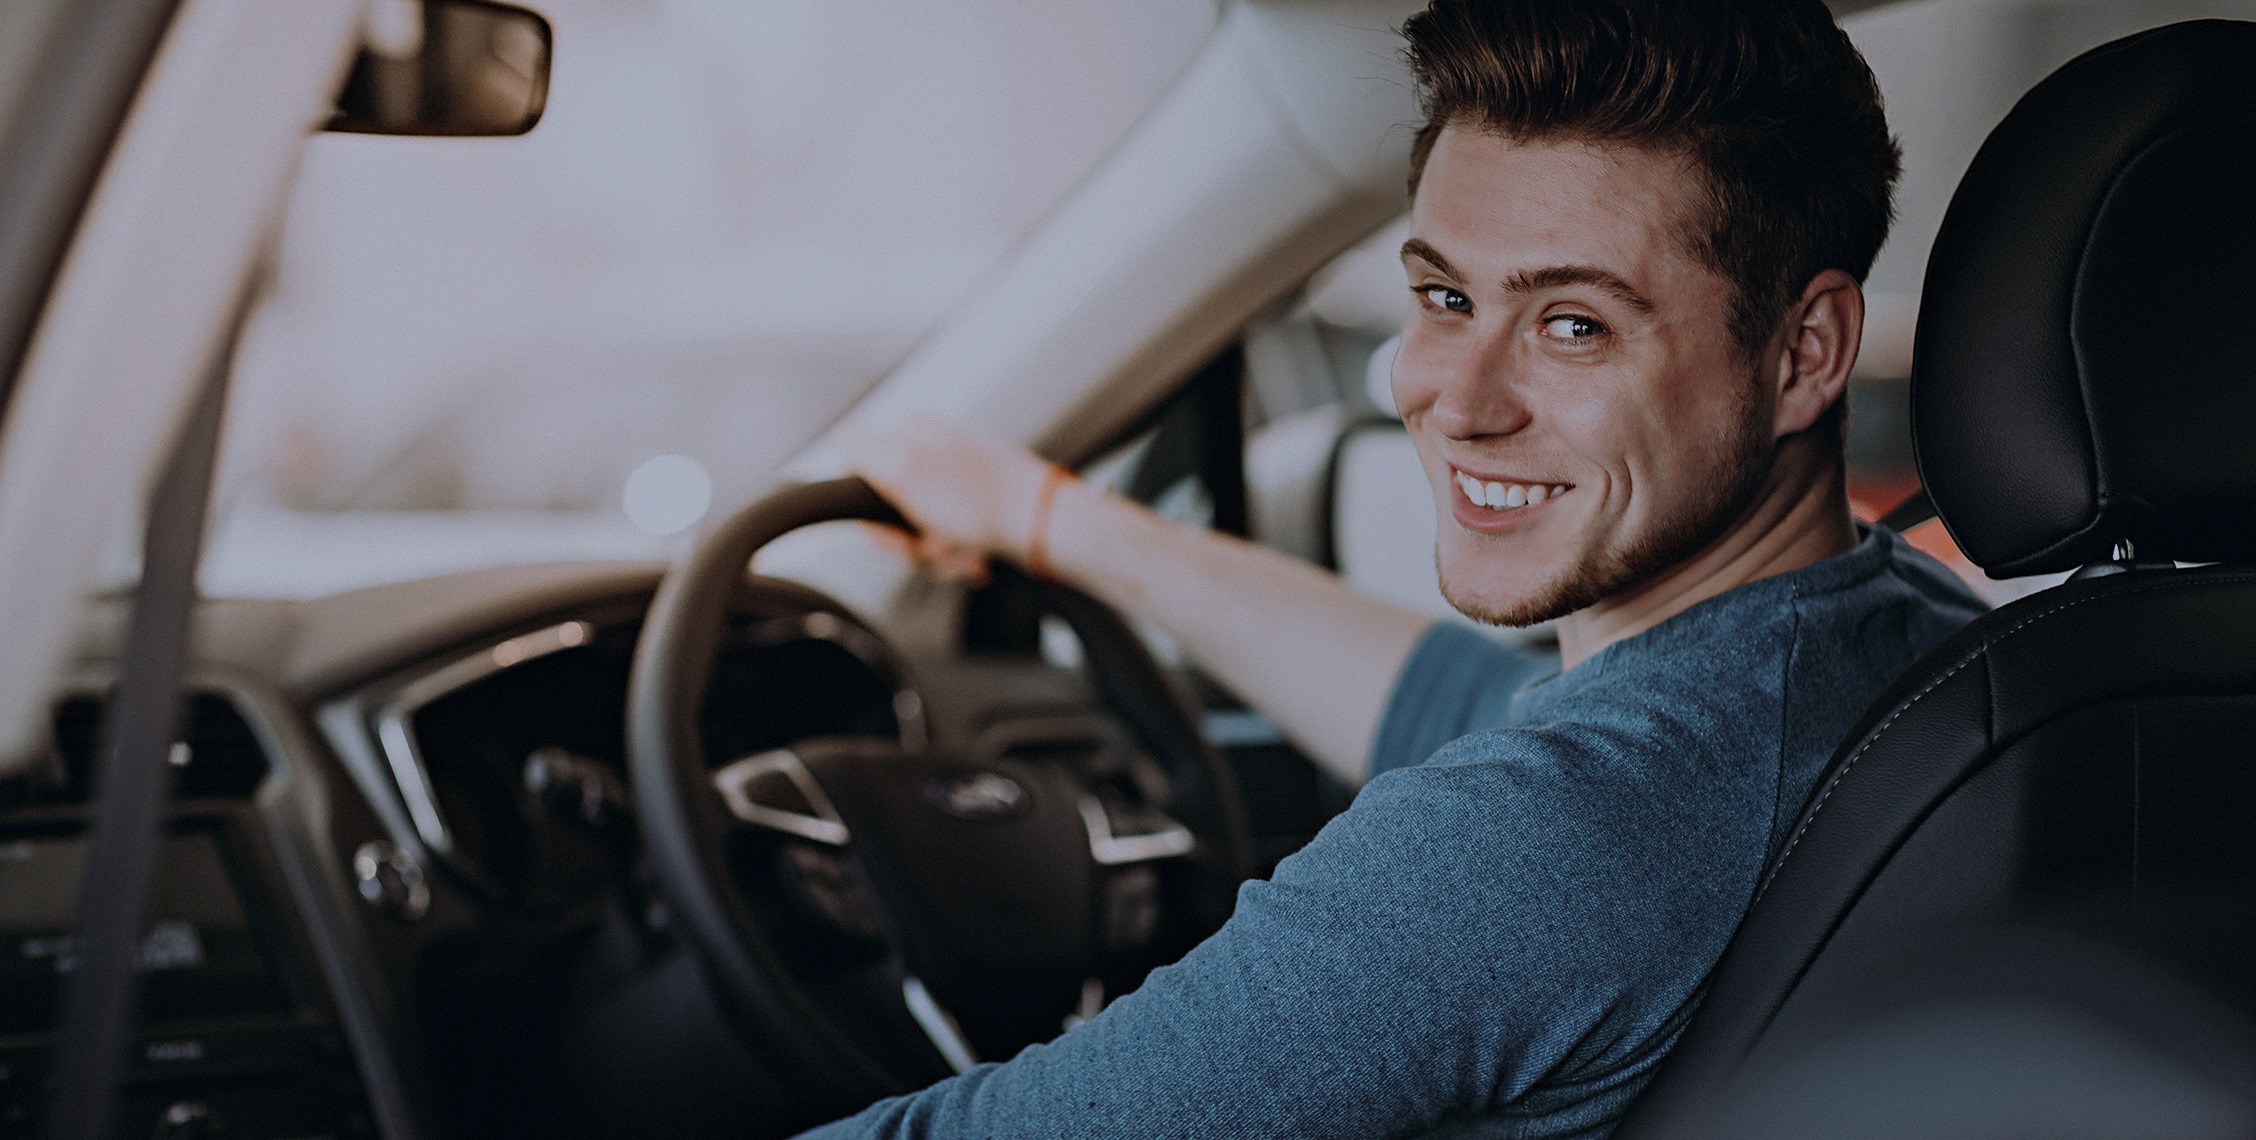 A young man in a blue shirt sat behind a steering wheel smiling to camera